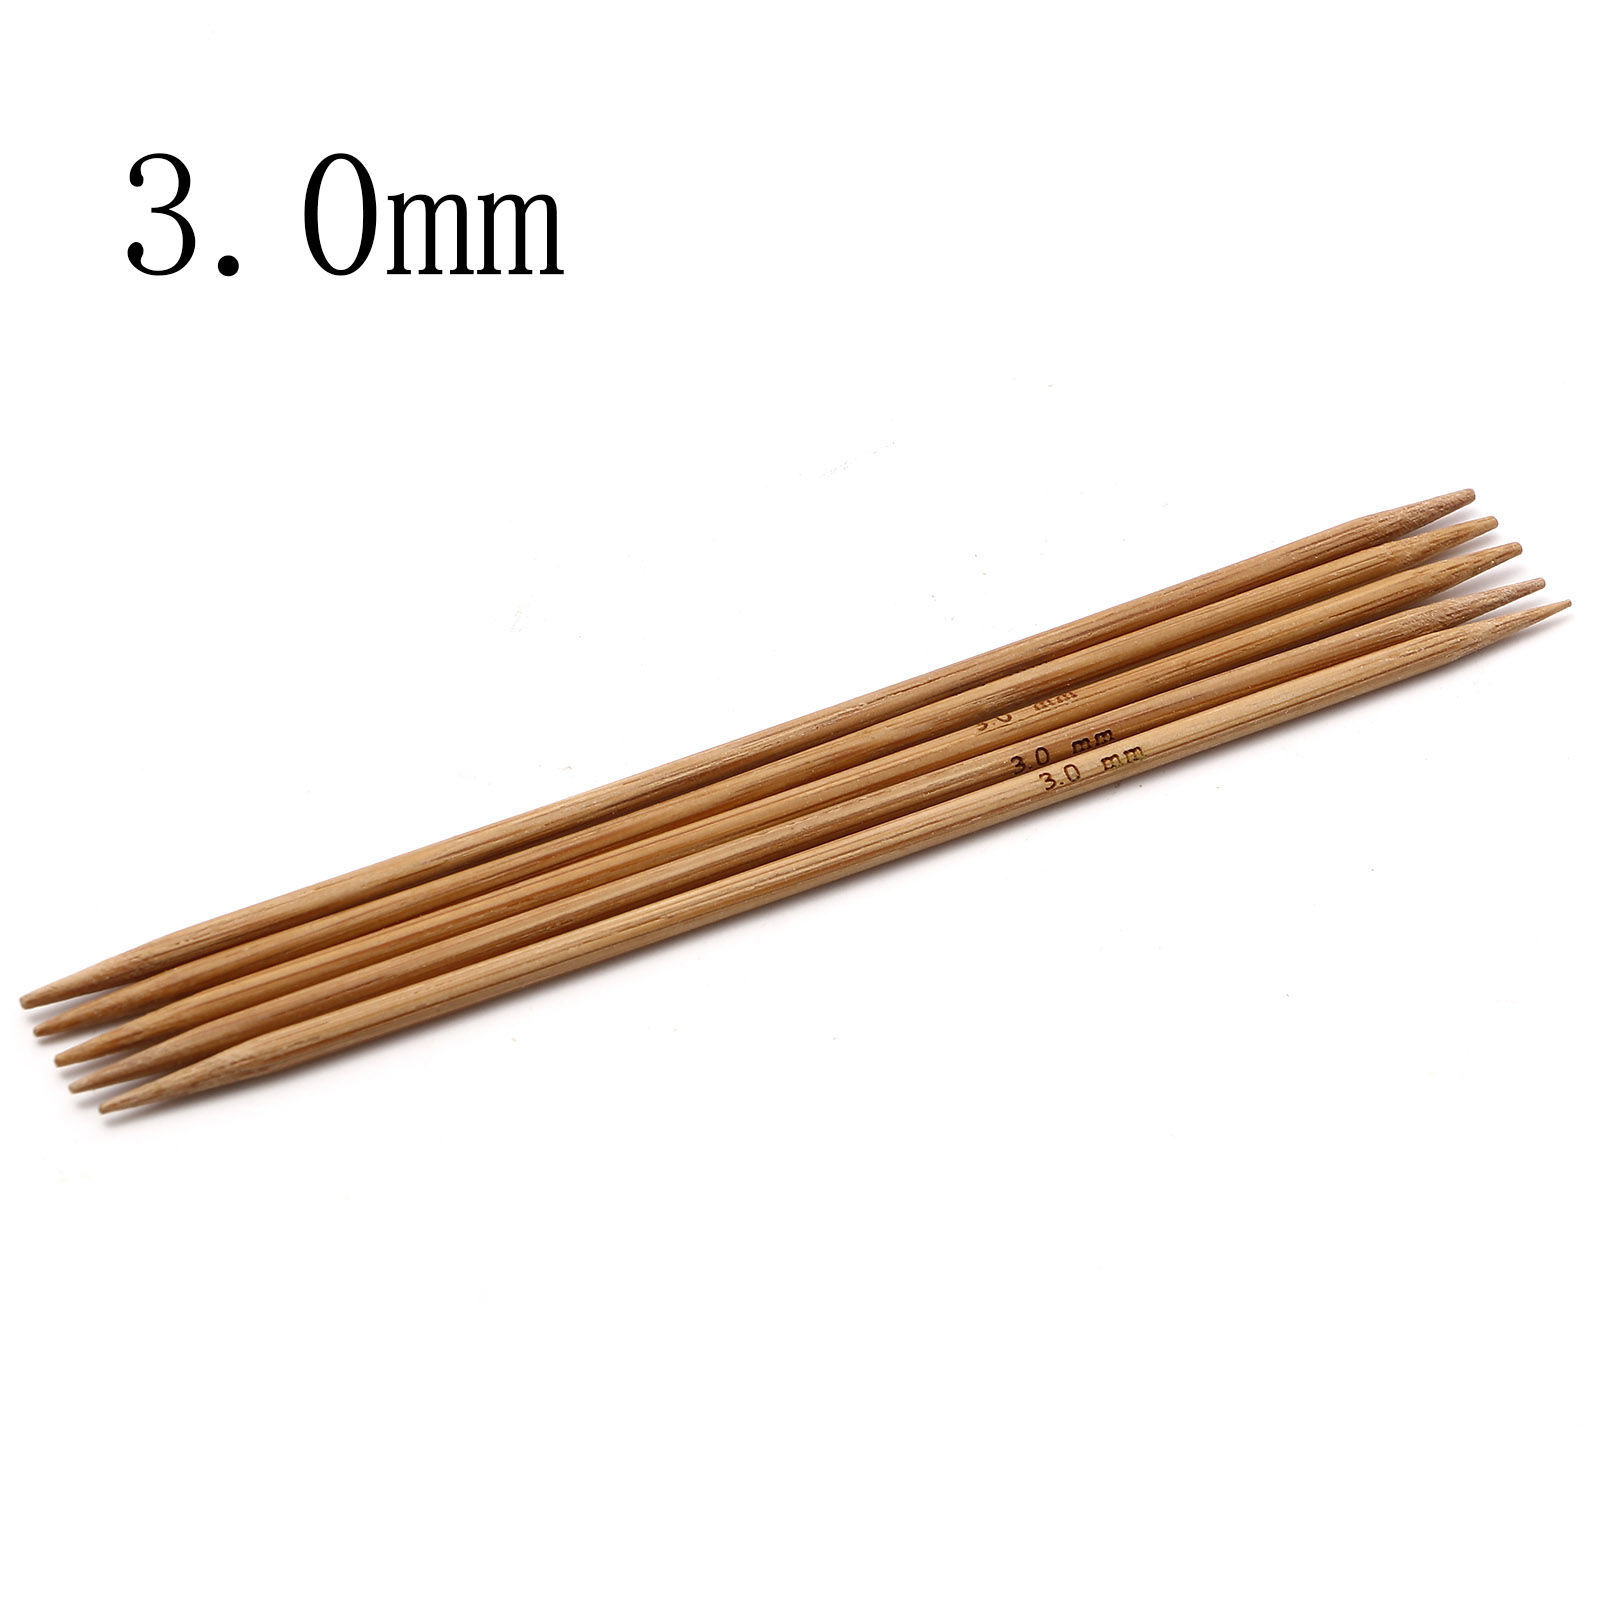 Picture of 3mm Bamboo Double Pointed Knitting Needles Brown 13cm(5 1/8") long, 5 PCs